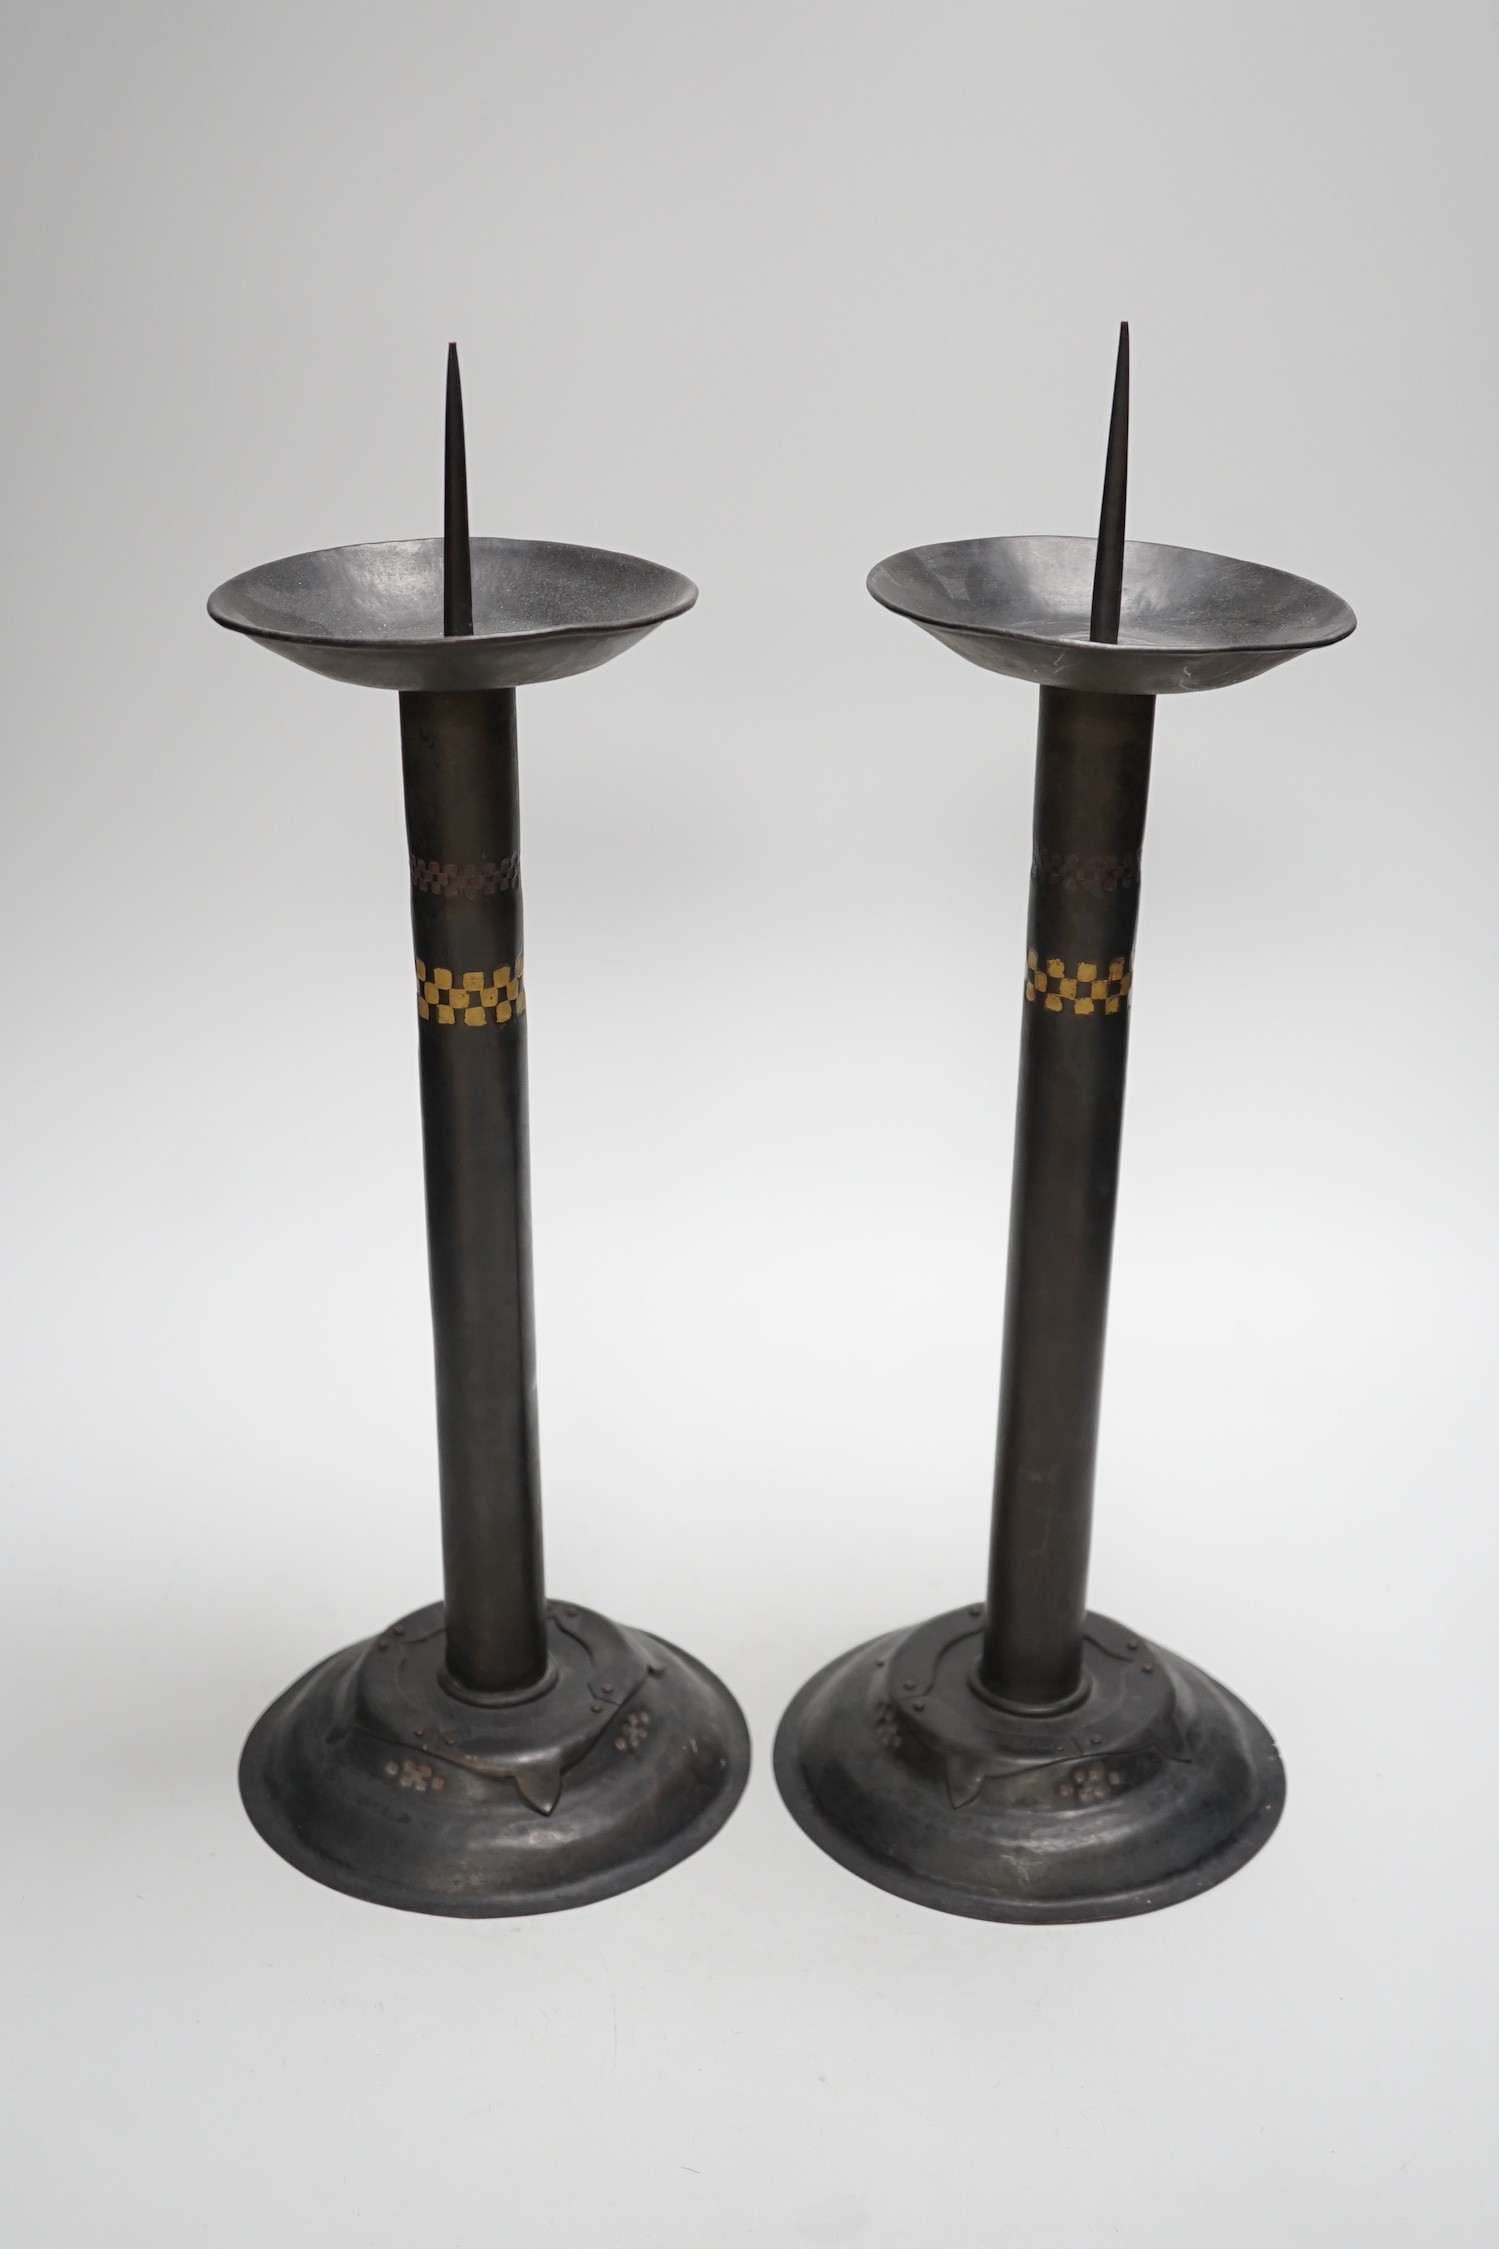 Attributed to Glasgow School of Art - a pair of Arts and Crafts pricket candlesticks. 40cm tall